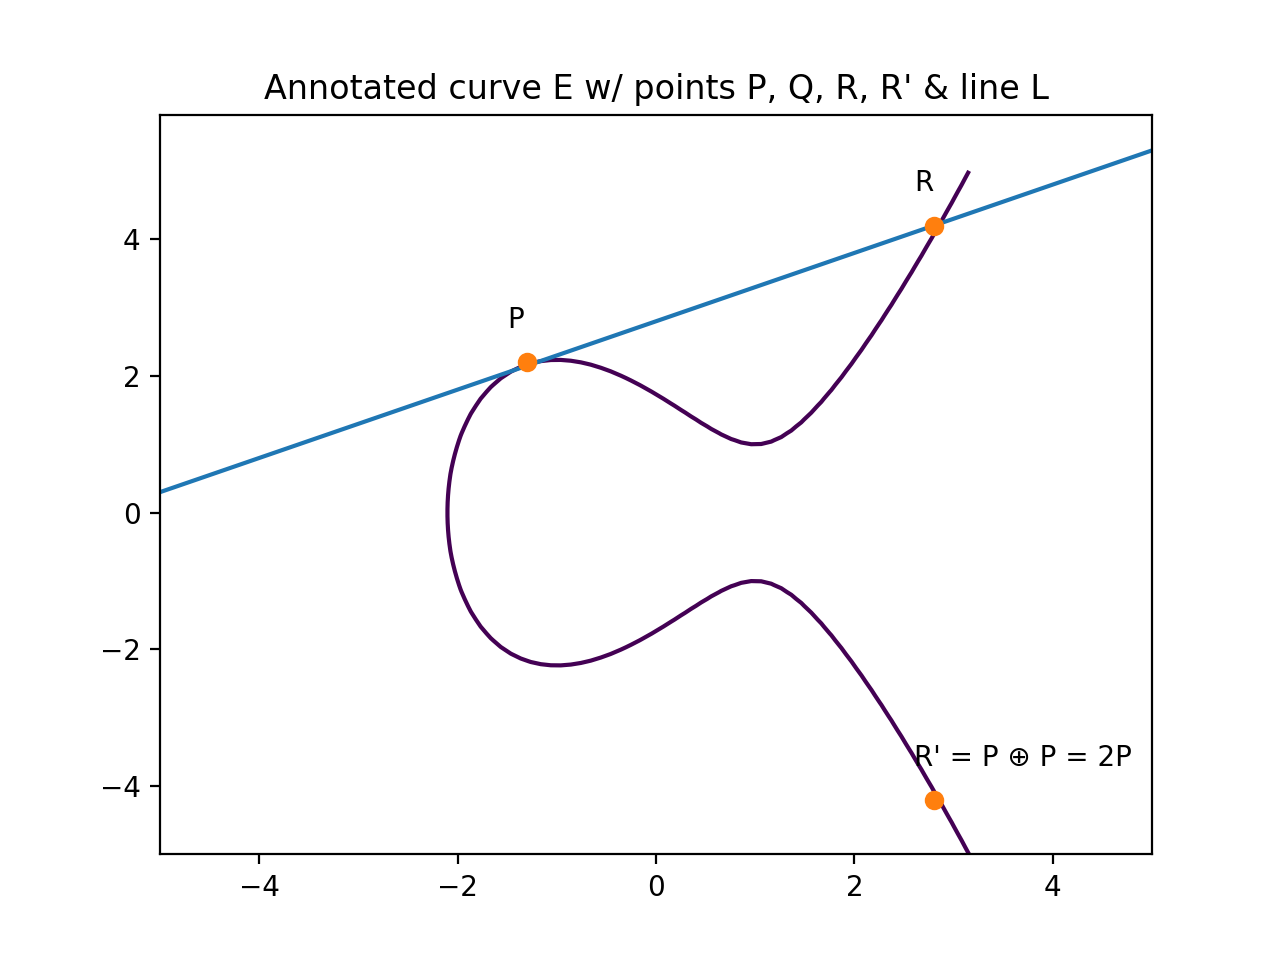 Annotated curve E with points P, R, R' and line L labeled. P is tangent to the curve.